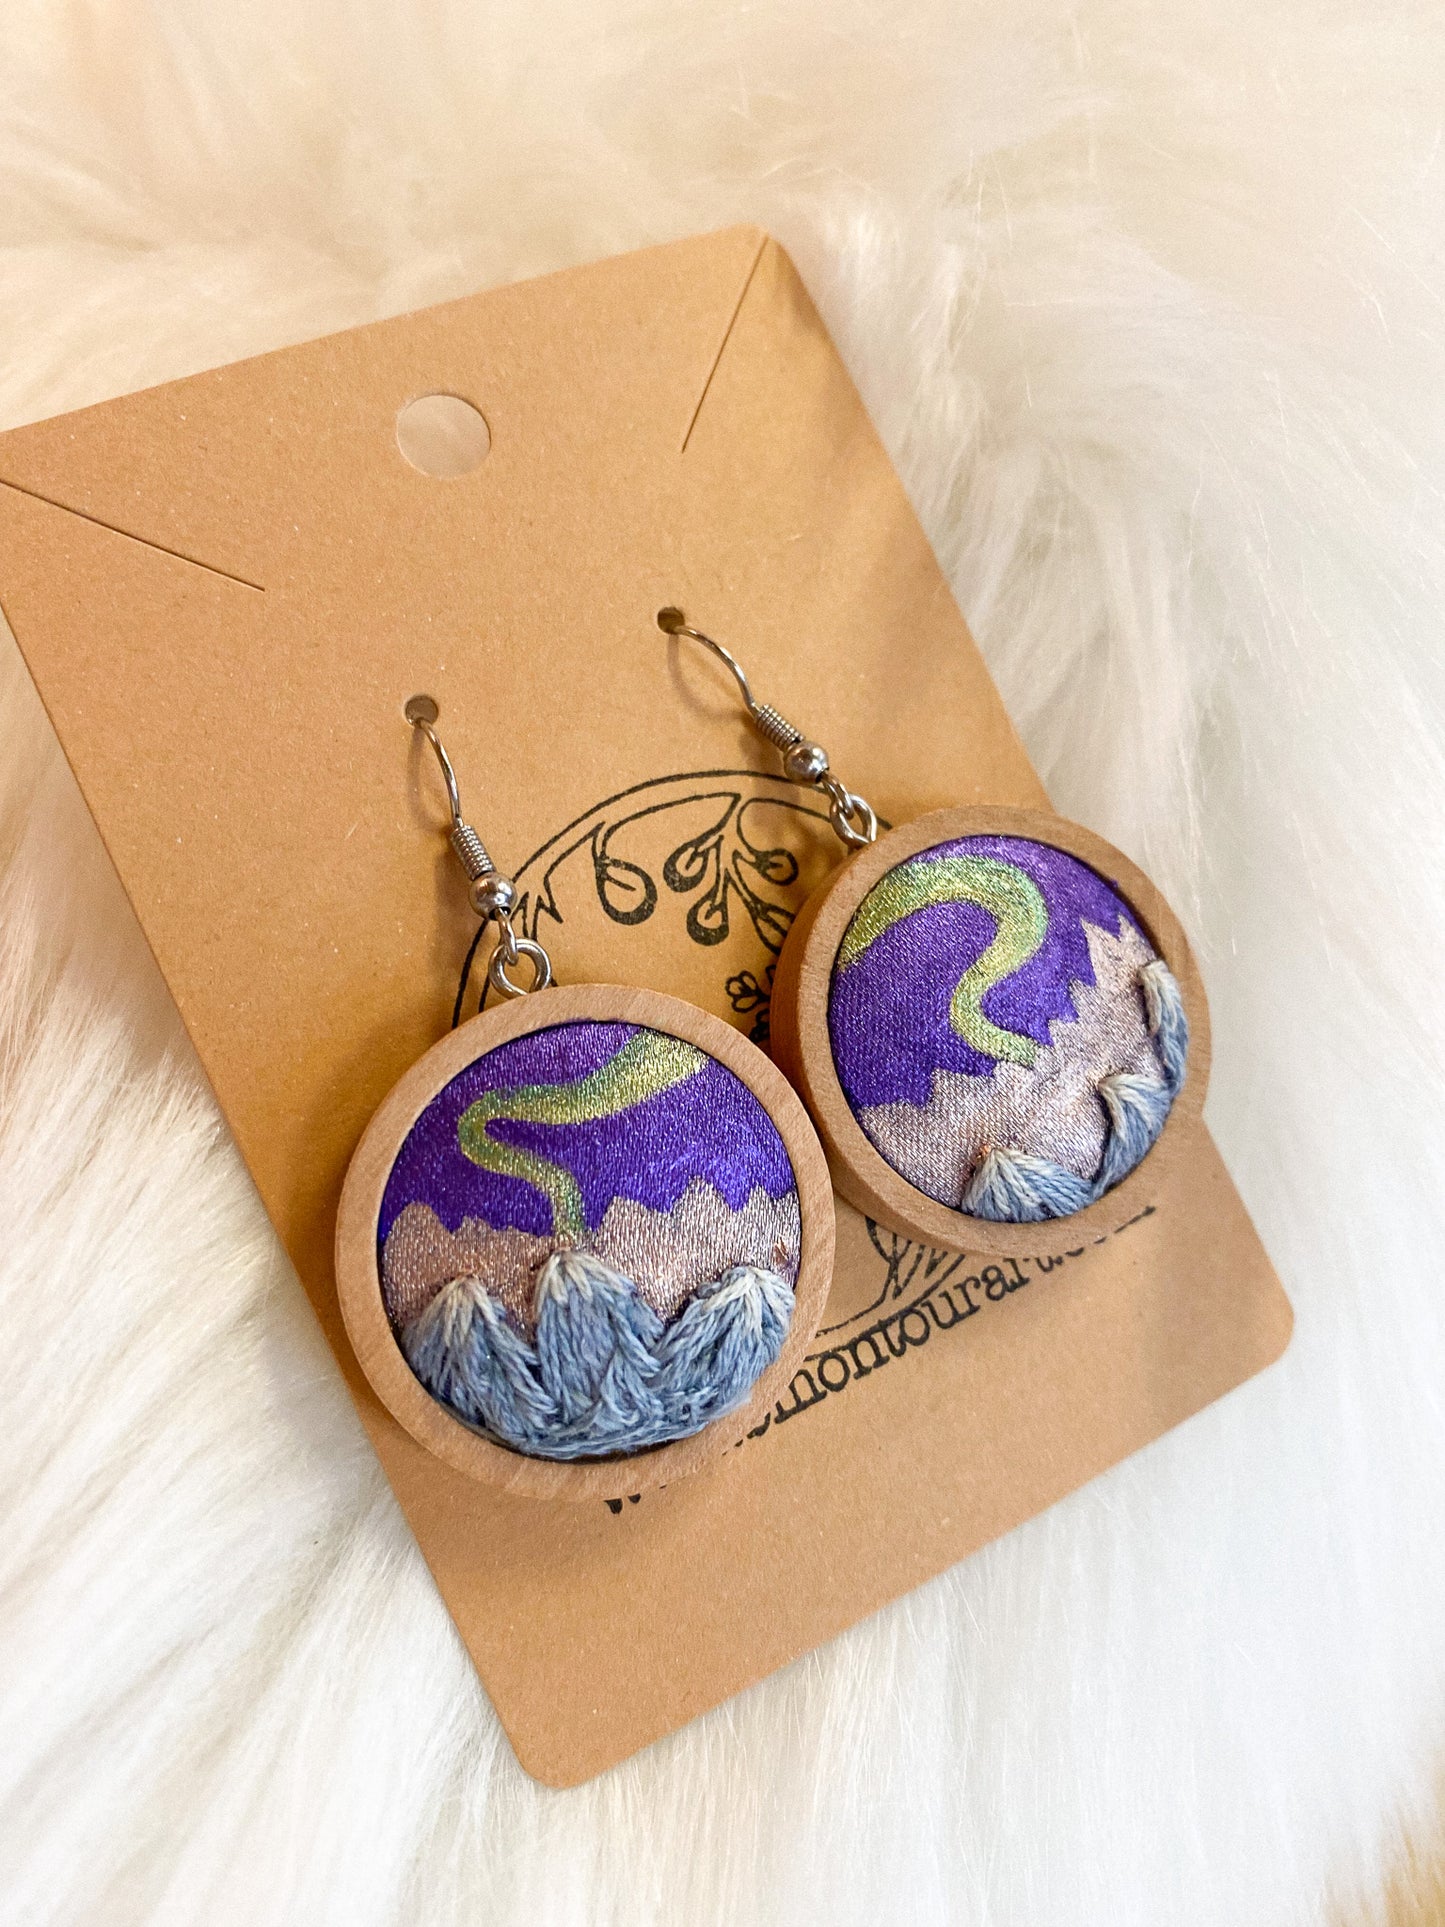 Aurora Over Pink Mountains Earrings by Brittany Montour